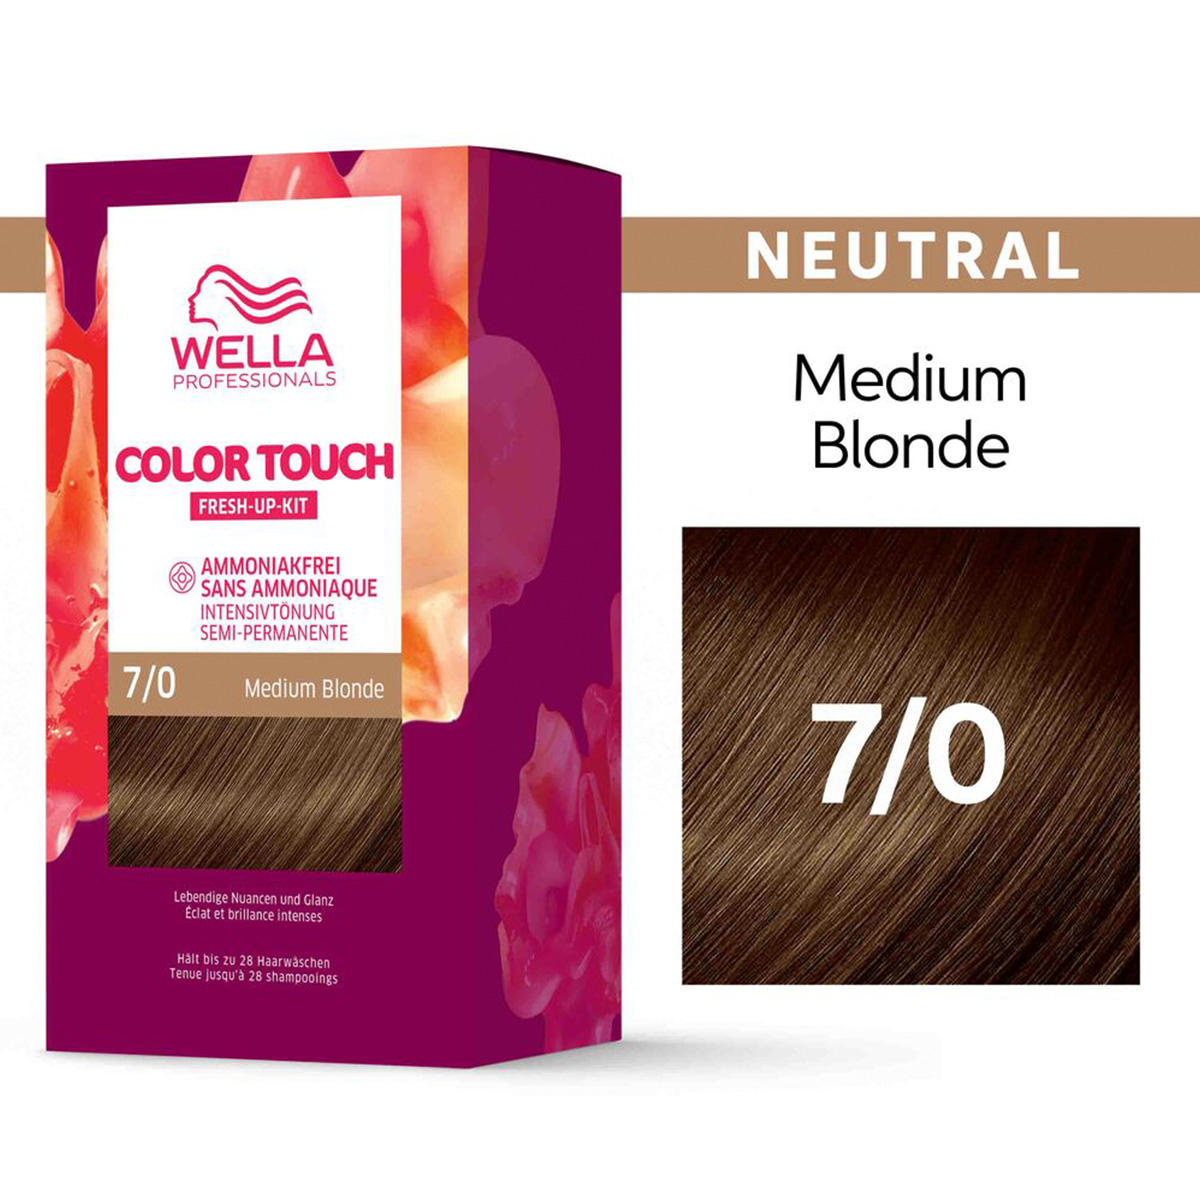 Wella Color Touch Fresh-Up-Kit 7/0 Biondo medio 130 ml - 2